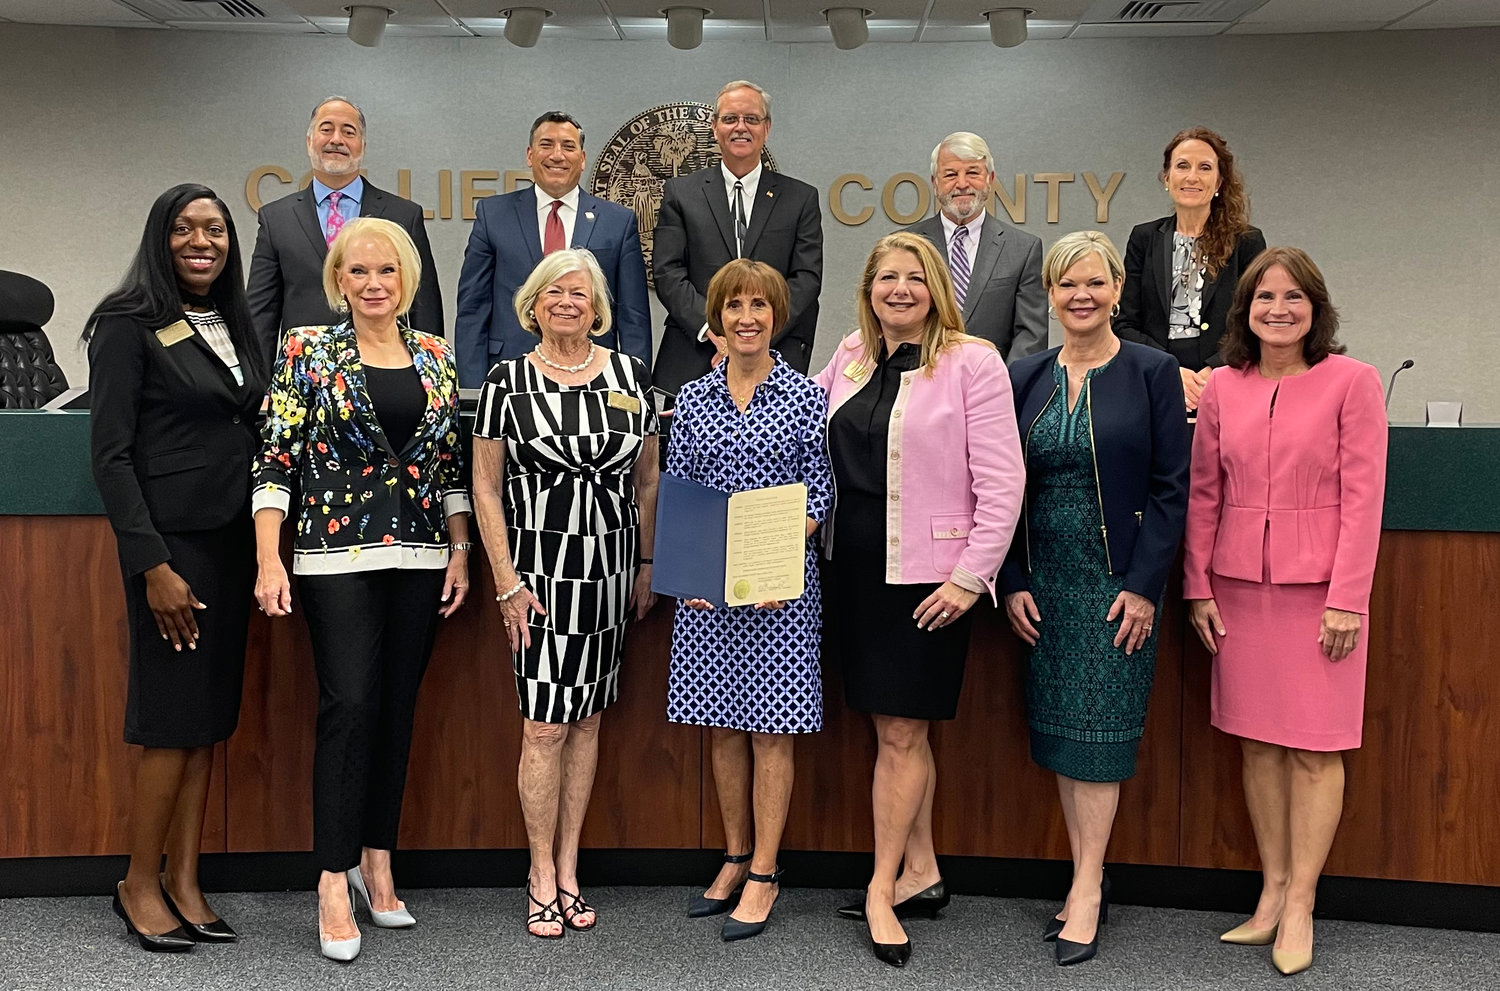 Pictured in the front row from left to right are Althea Irving, Brenda O’Connor, Bette Aymar, Donna Messer, Lori Fowler, Lynda Waterhouse, and Michelle McLeod. Pictured in the back row from left to right are Collier County Commissioners Andy Solis, Rick Lo Castro, Bill McDaniel, Burt Saunders, and Penny Taylor.